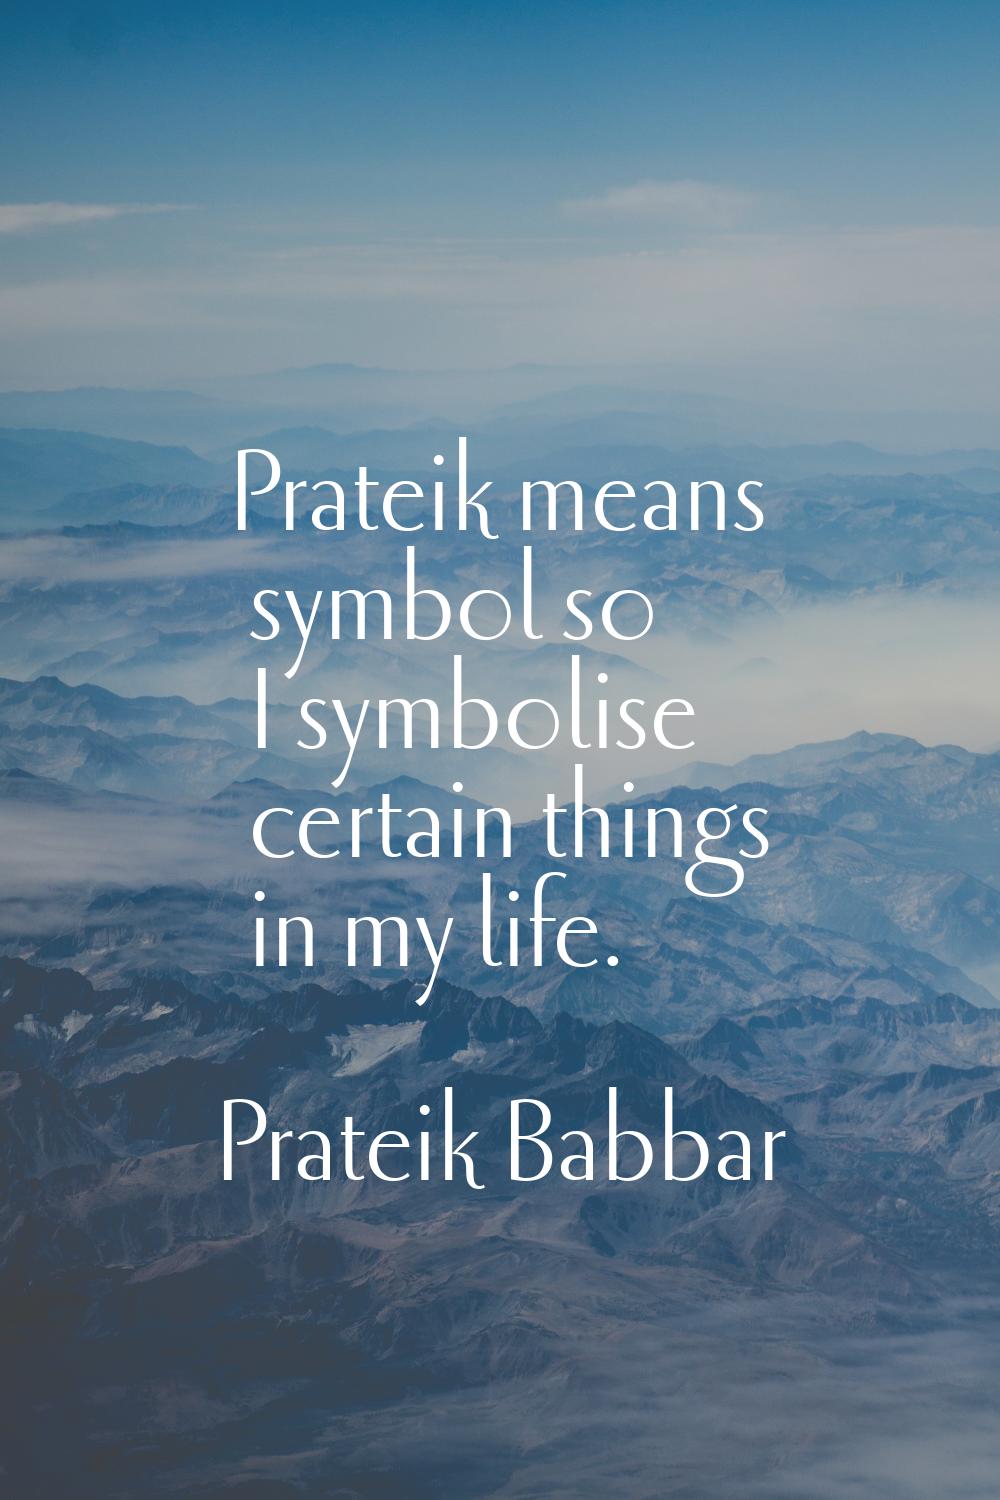 Prateik means symbol so I symbolise certain things in my life.